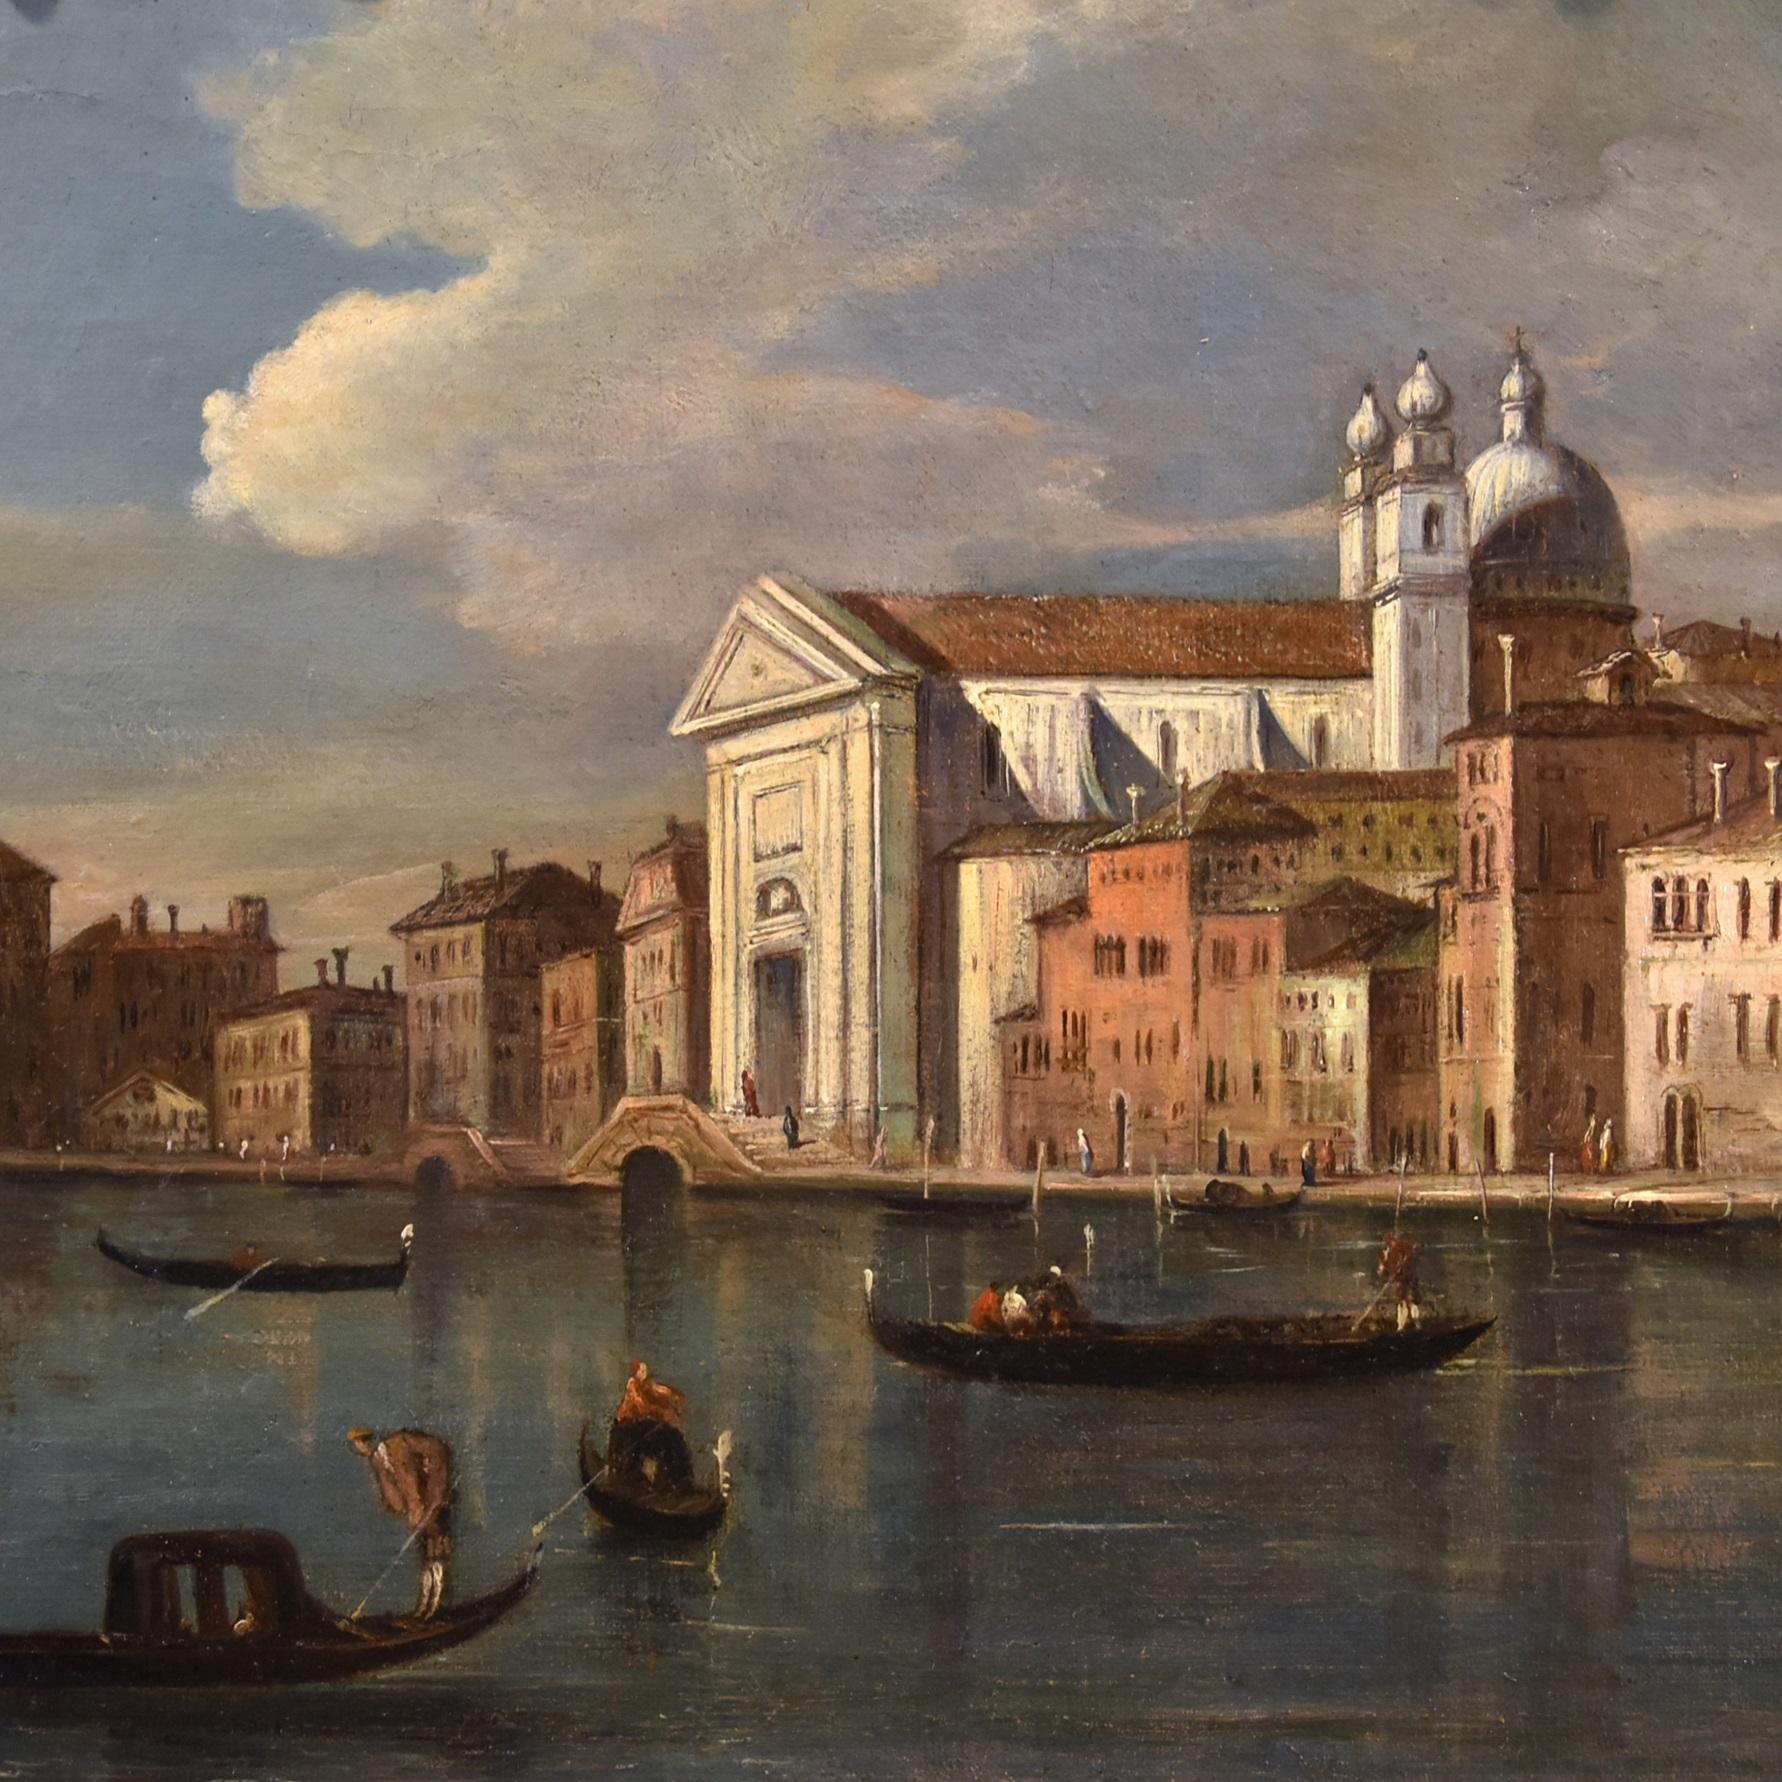 Giacomo Guardi (Venice, 1764 - Venice, 1835)
View of Venice with the Giudecca Canal and the Gesuati Church

oil on canvas
34 x 42 cm. - framed 40 x 50 cm.

Expertise dott Federica Spadotto

The beautiful view of Venice elects the church of Santa